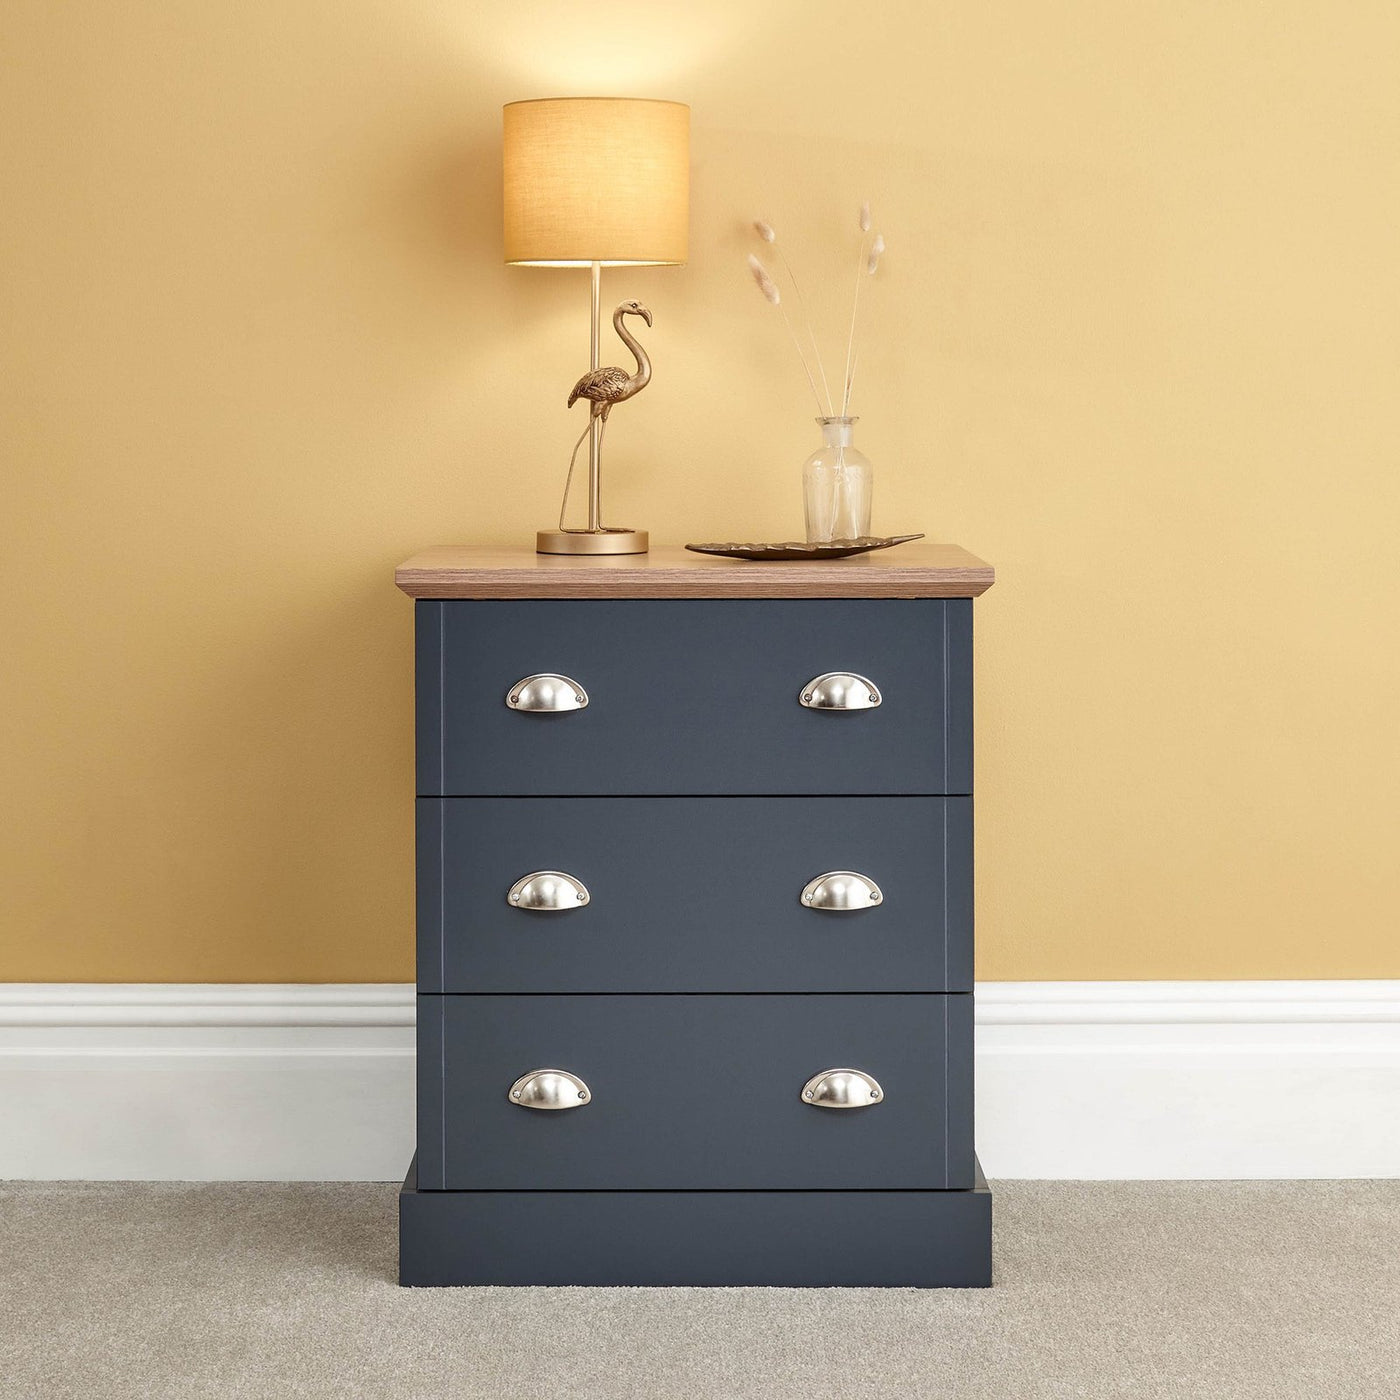 Kendal 3 Drawer Chest - Grab Some Furniture